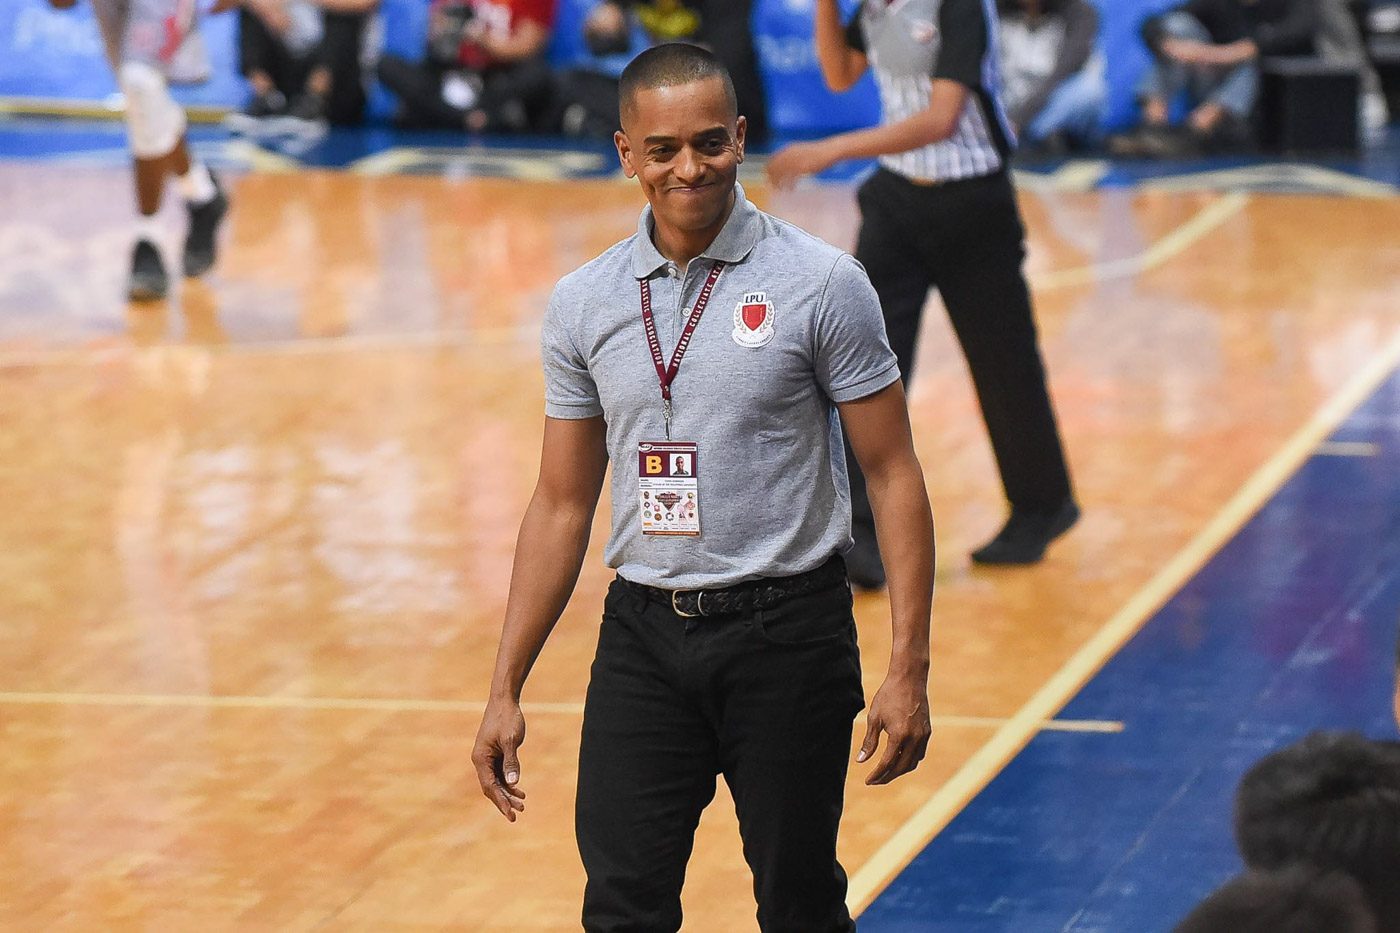 Topex Robinson rips NCAA on ‘consistency’ regarding rules